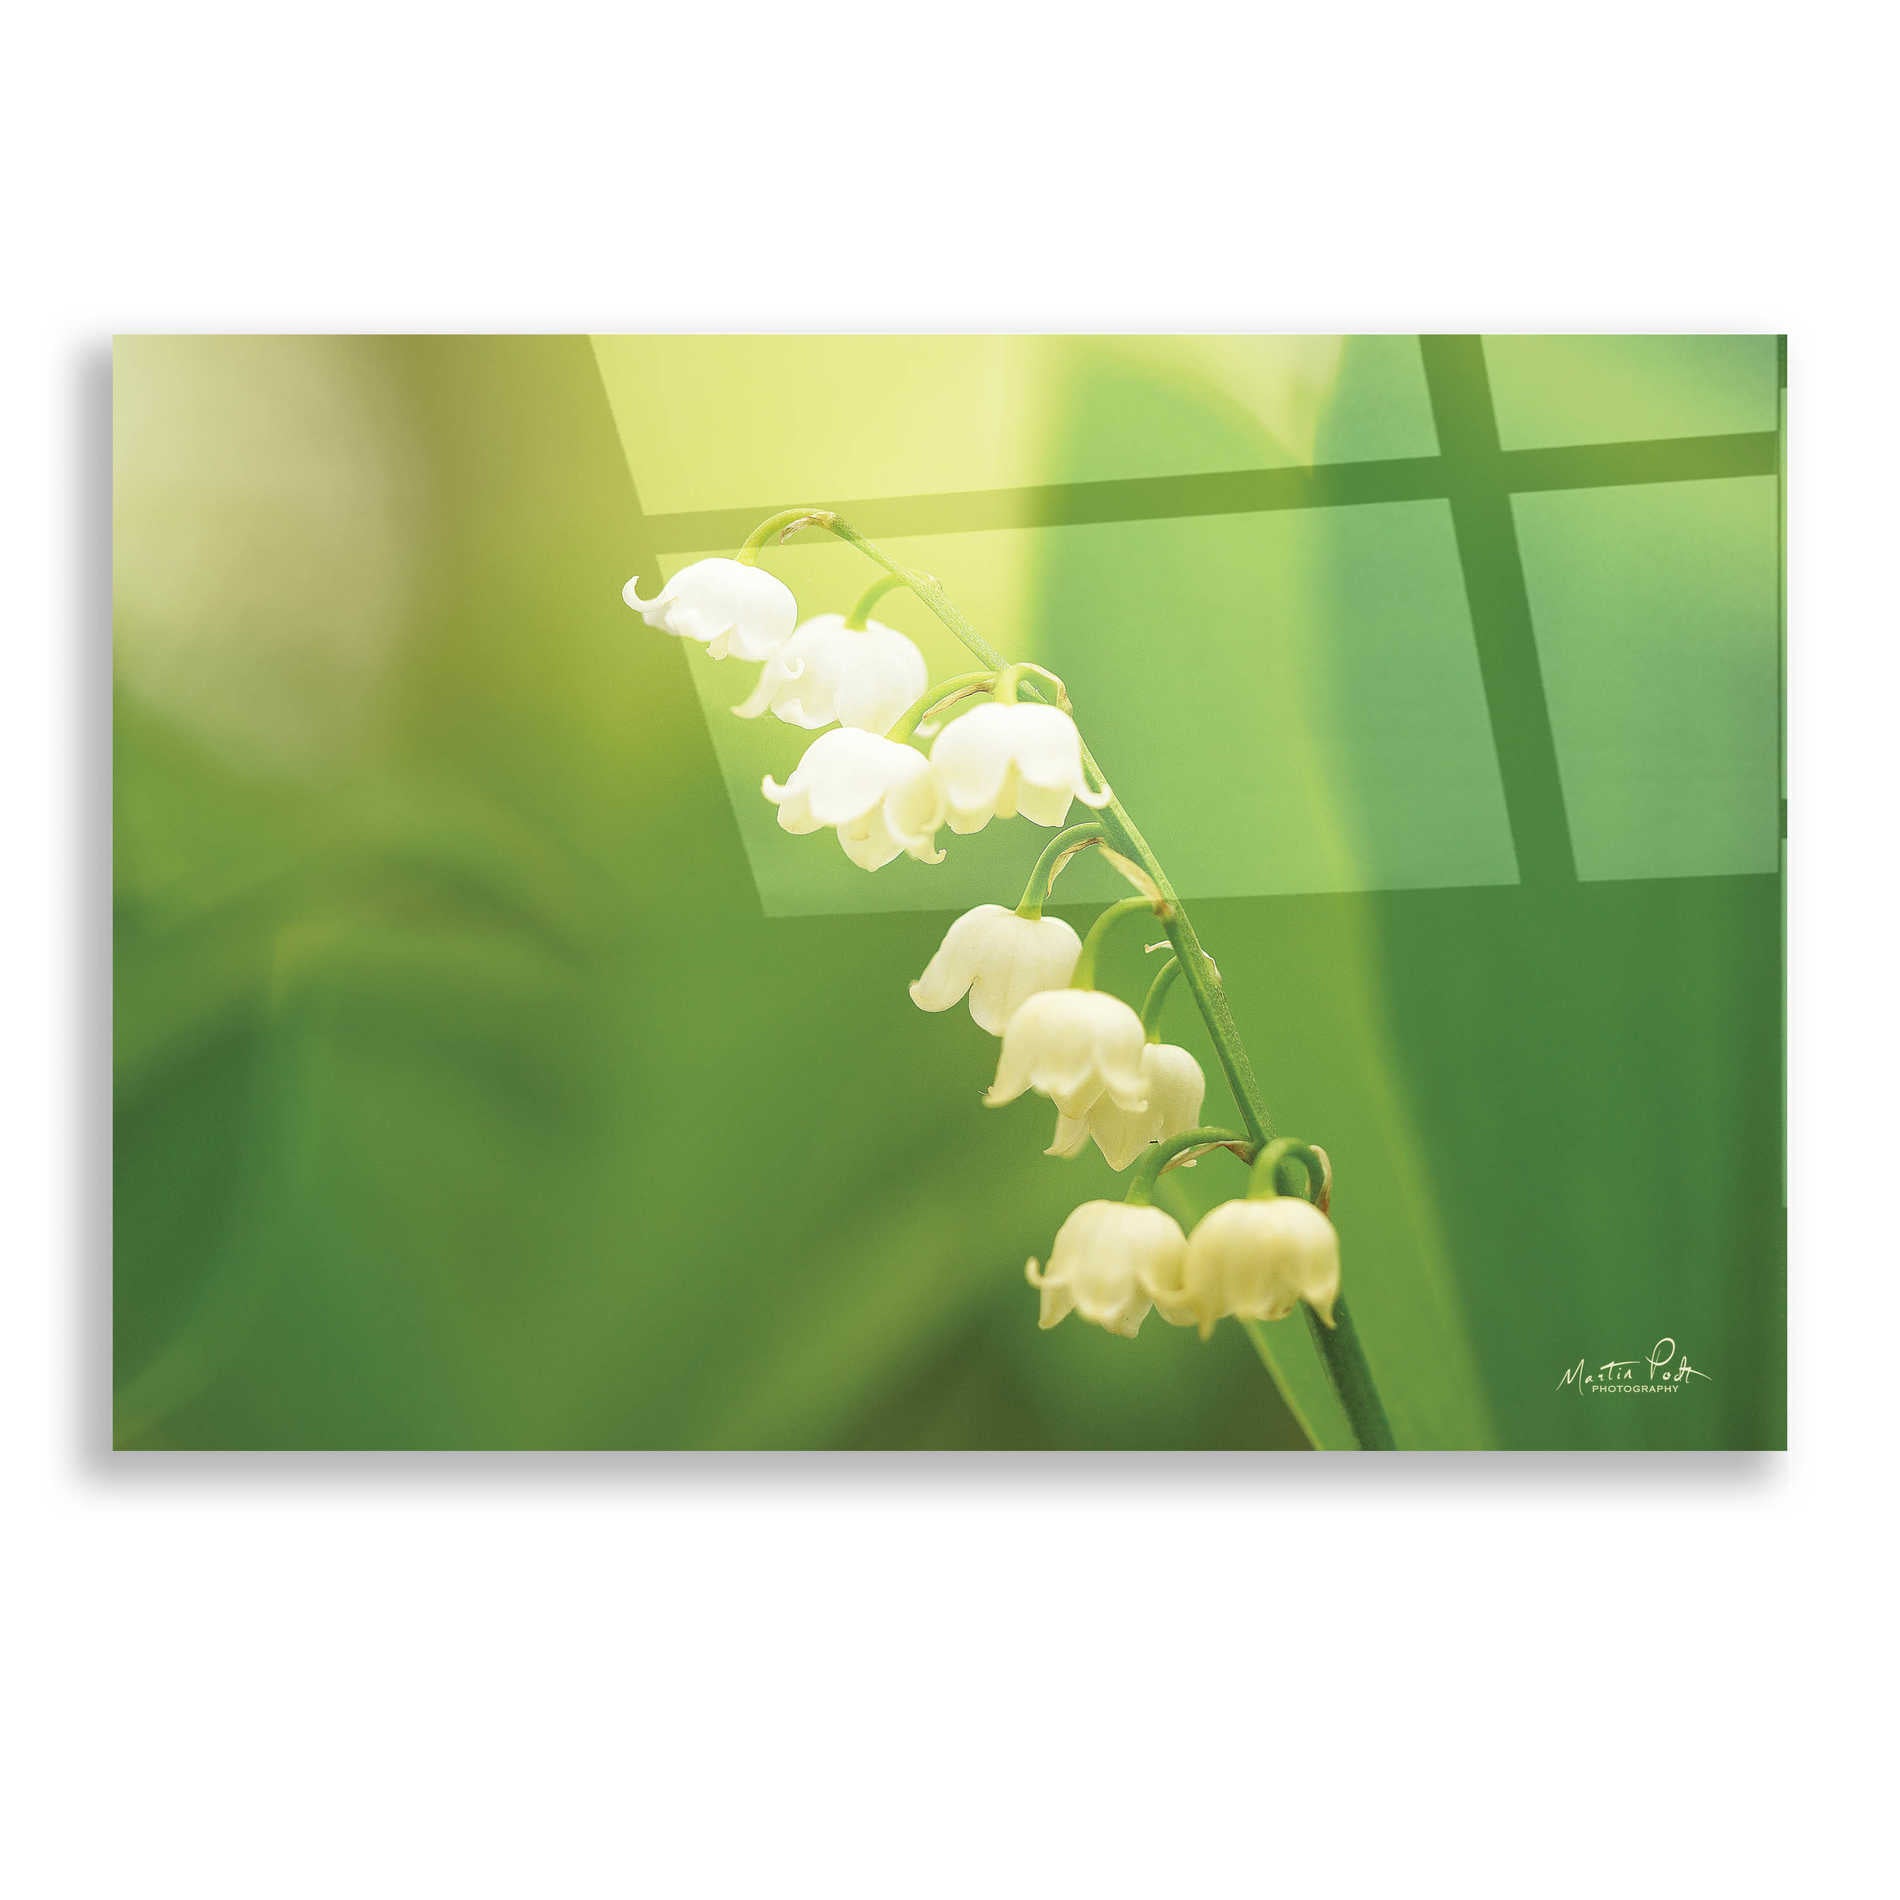 Epic Art 'Lily of the Valley' by Martin Podt, Acrylic Glass Wall Art,16x12